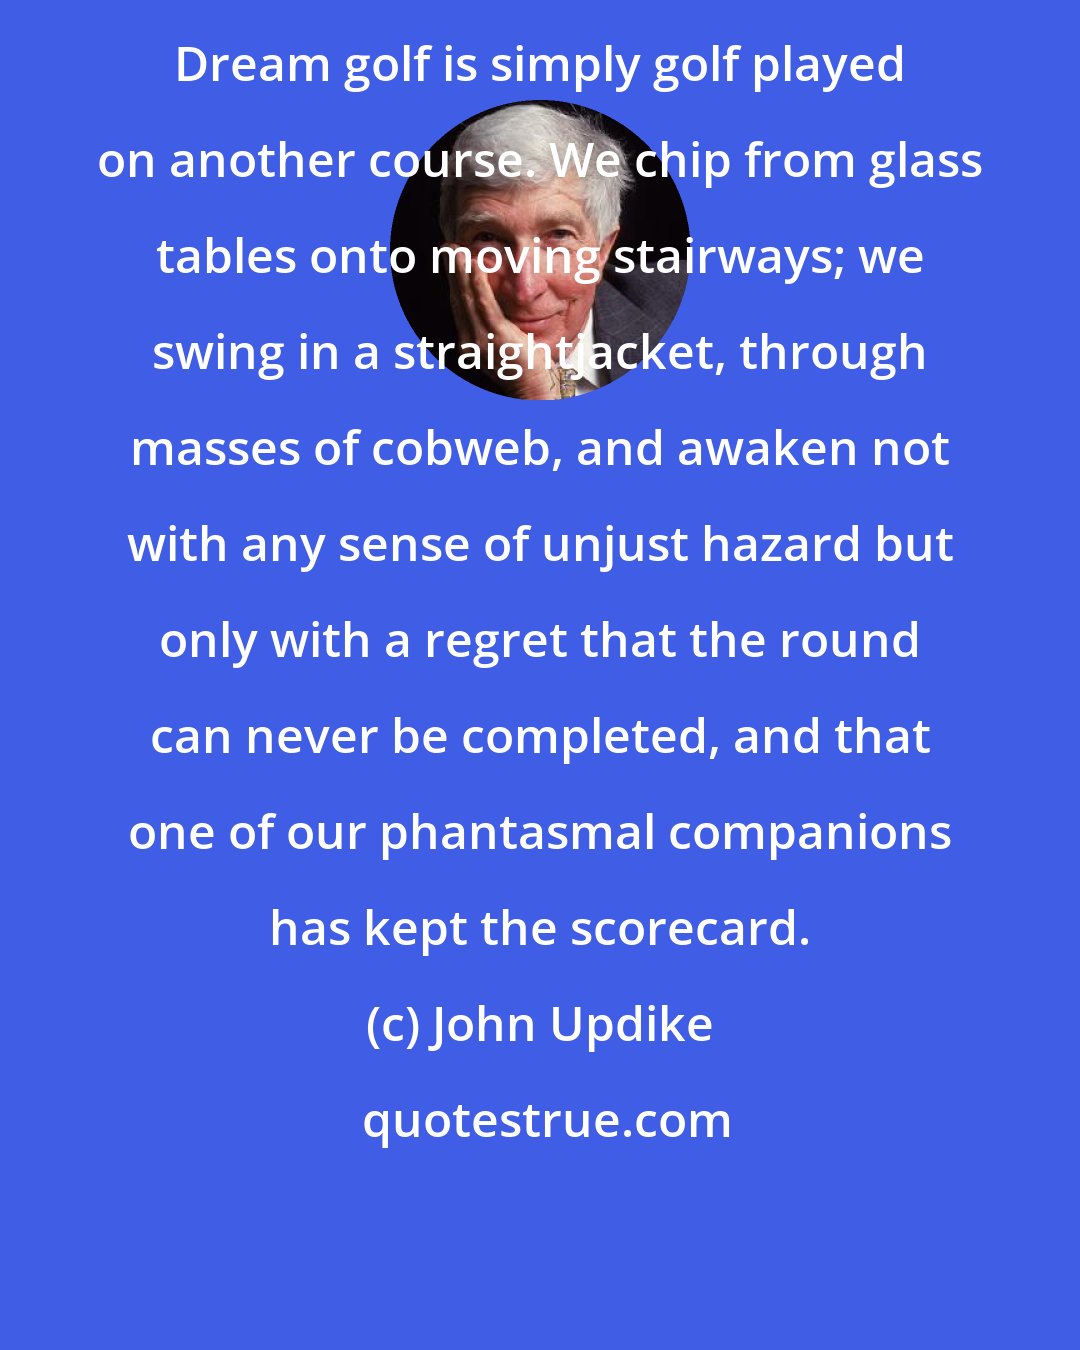 John Updike: Dream golf is simply golf played on another course. We chip from glass tables onto moving stairways; we swing in a straightjacket, through masses of cobweb, and awaken not with any sense of unjust hazard but only with a regret that the round can never be completed, and that one of our phantasmal companions has kept the scorecard.